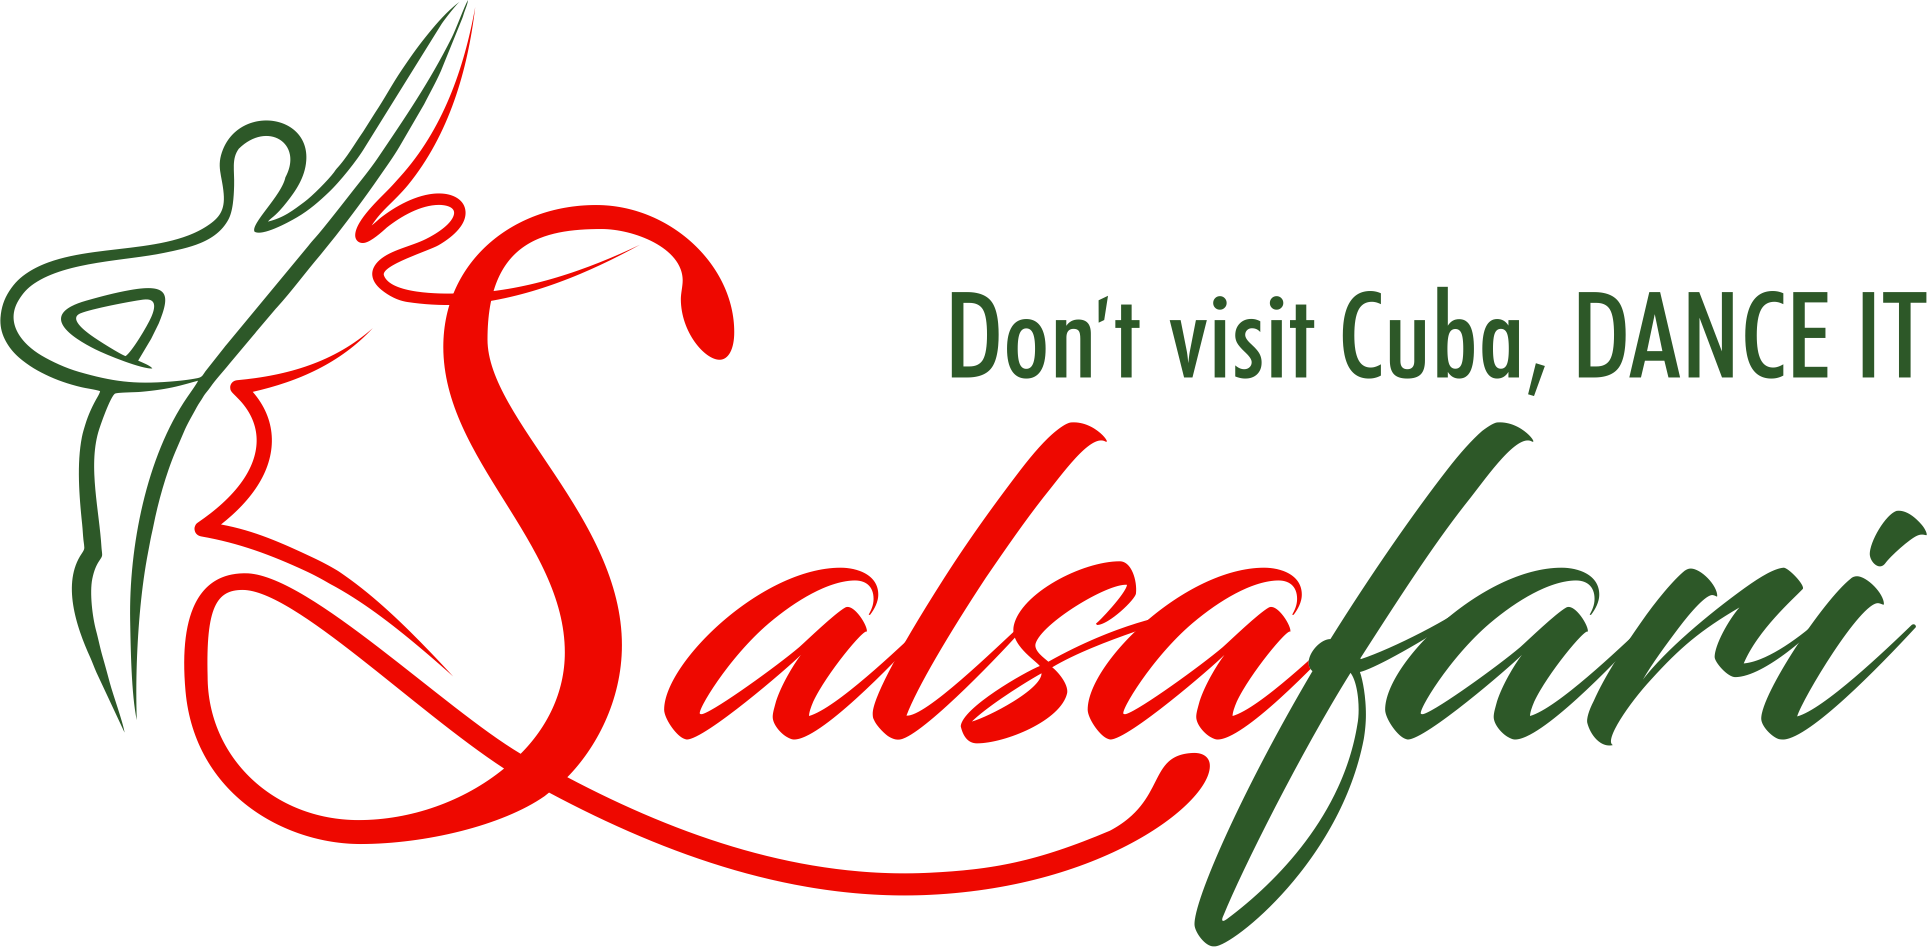 http://salsafari.net/wp-content/uploads/2017/10/cropped-Logo-00.png